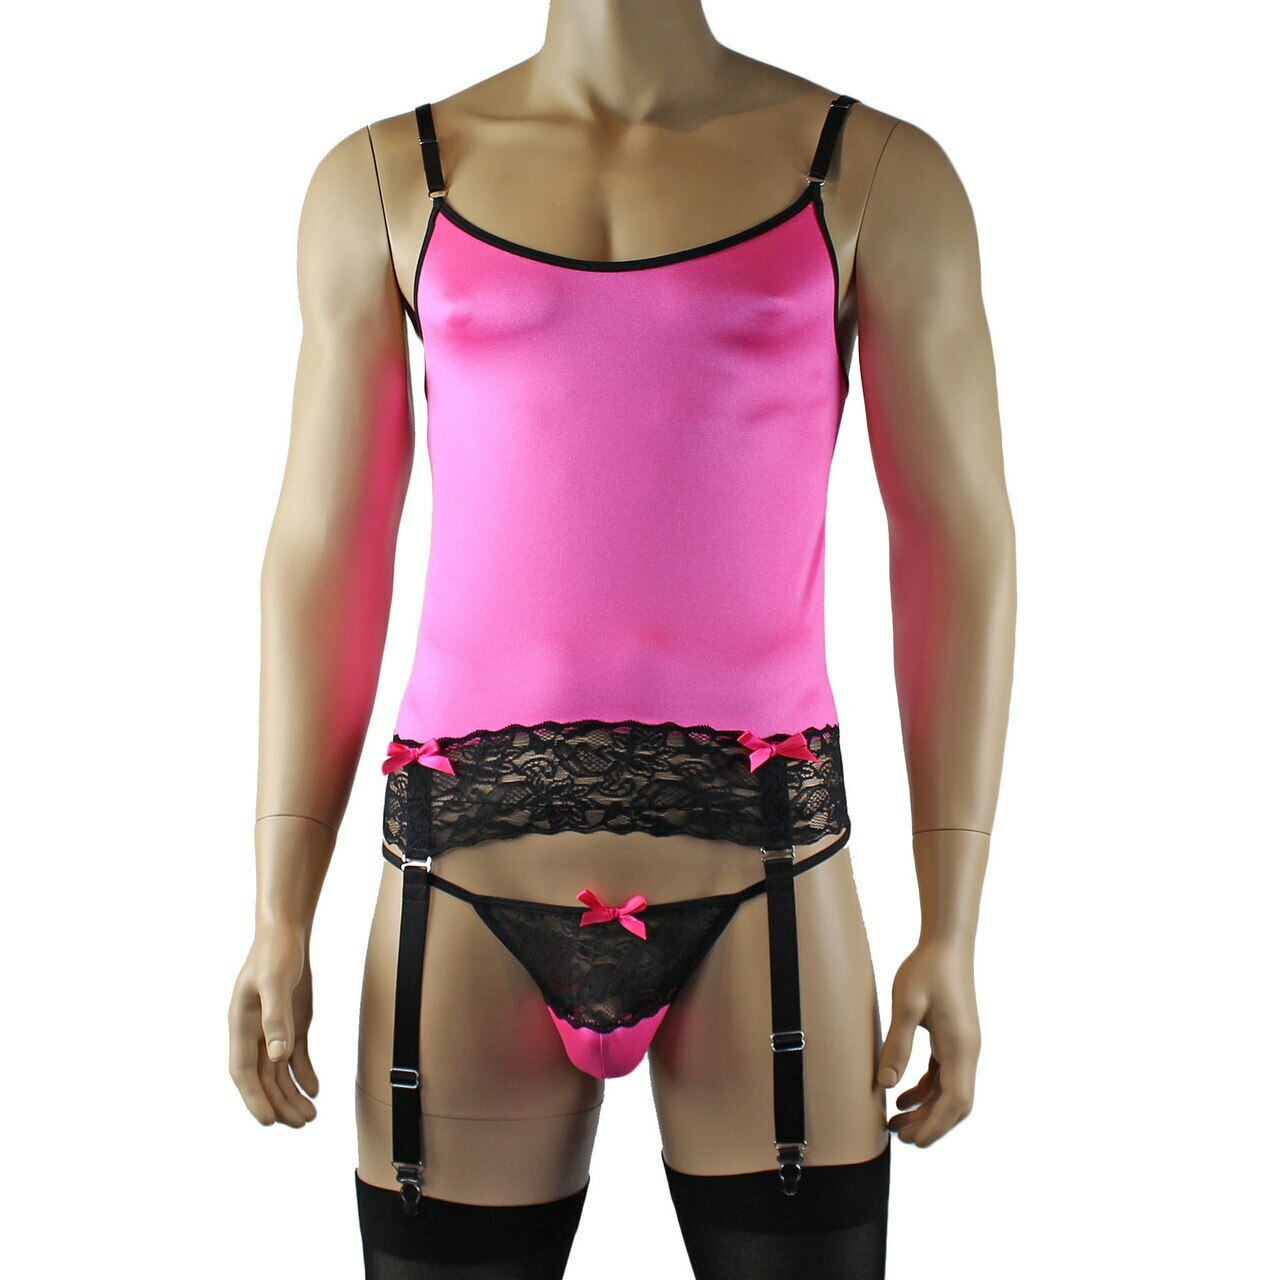 Mens Camisole Bustier Garter Top with Pouch G string & Stockings (hot pink plus other colours)